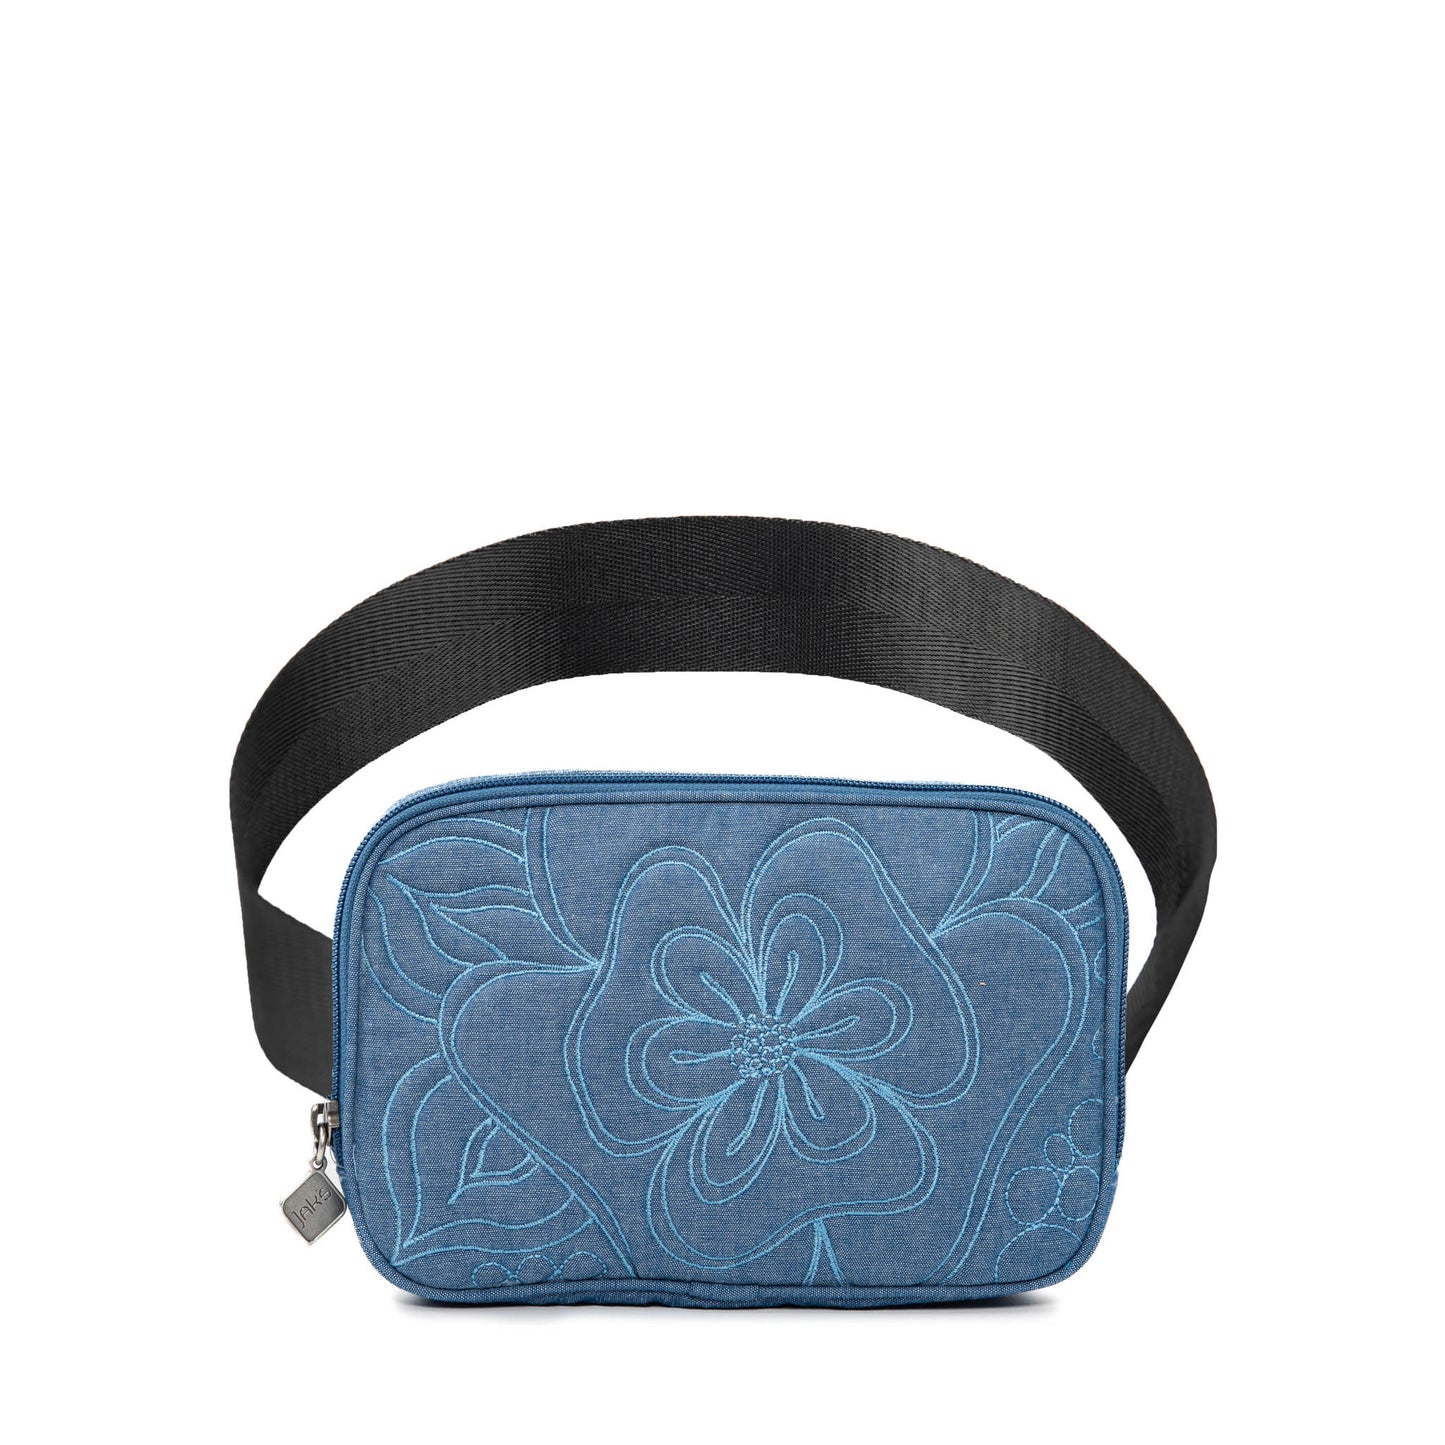 Waist Pouch With Floral Design